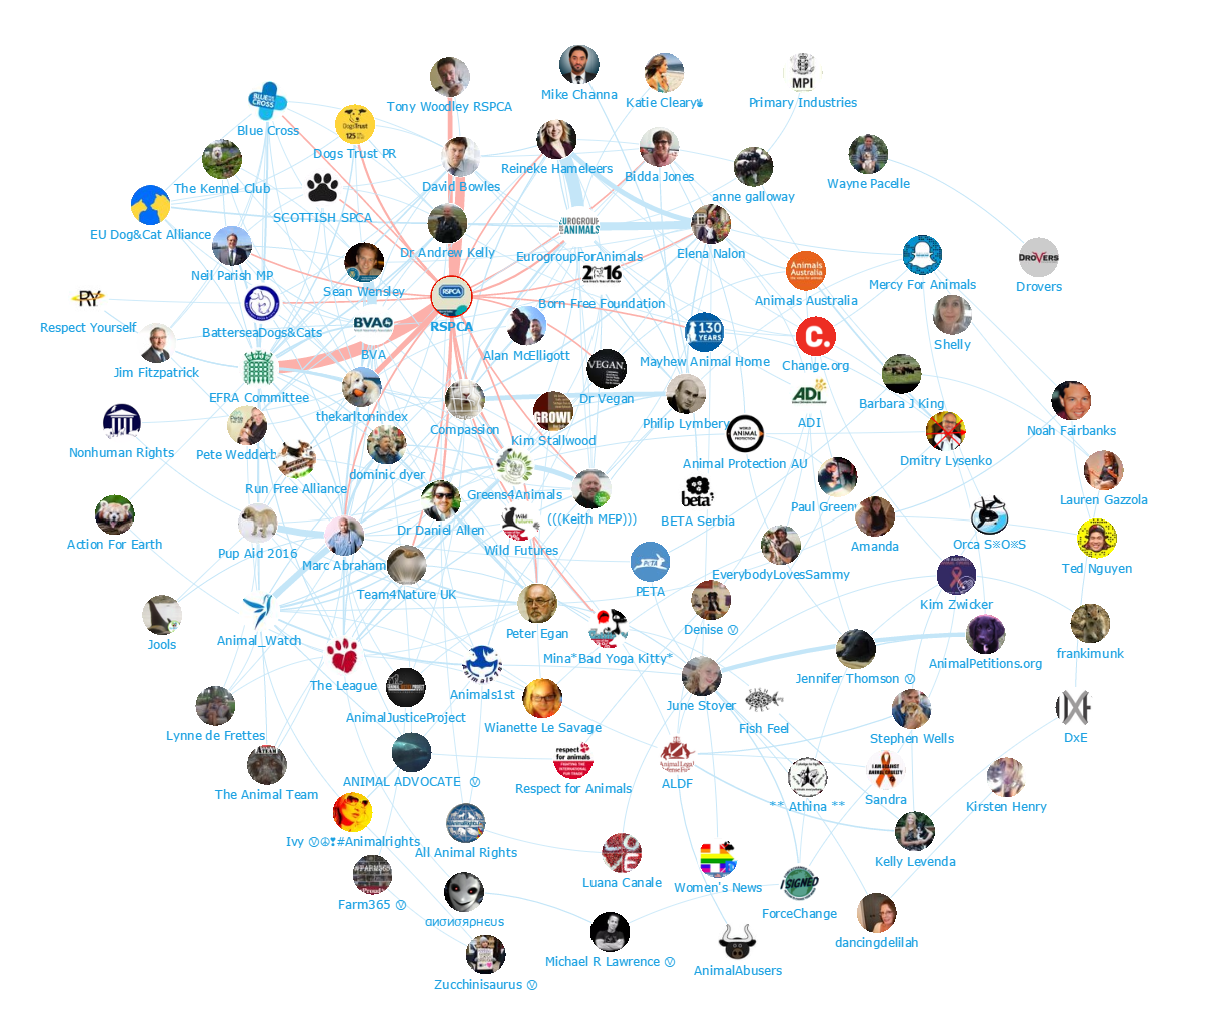 Animal Welfare: Top 100 Influencers and Brands